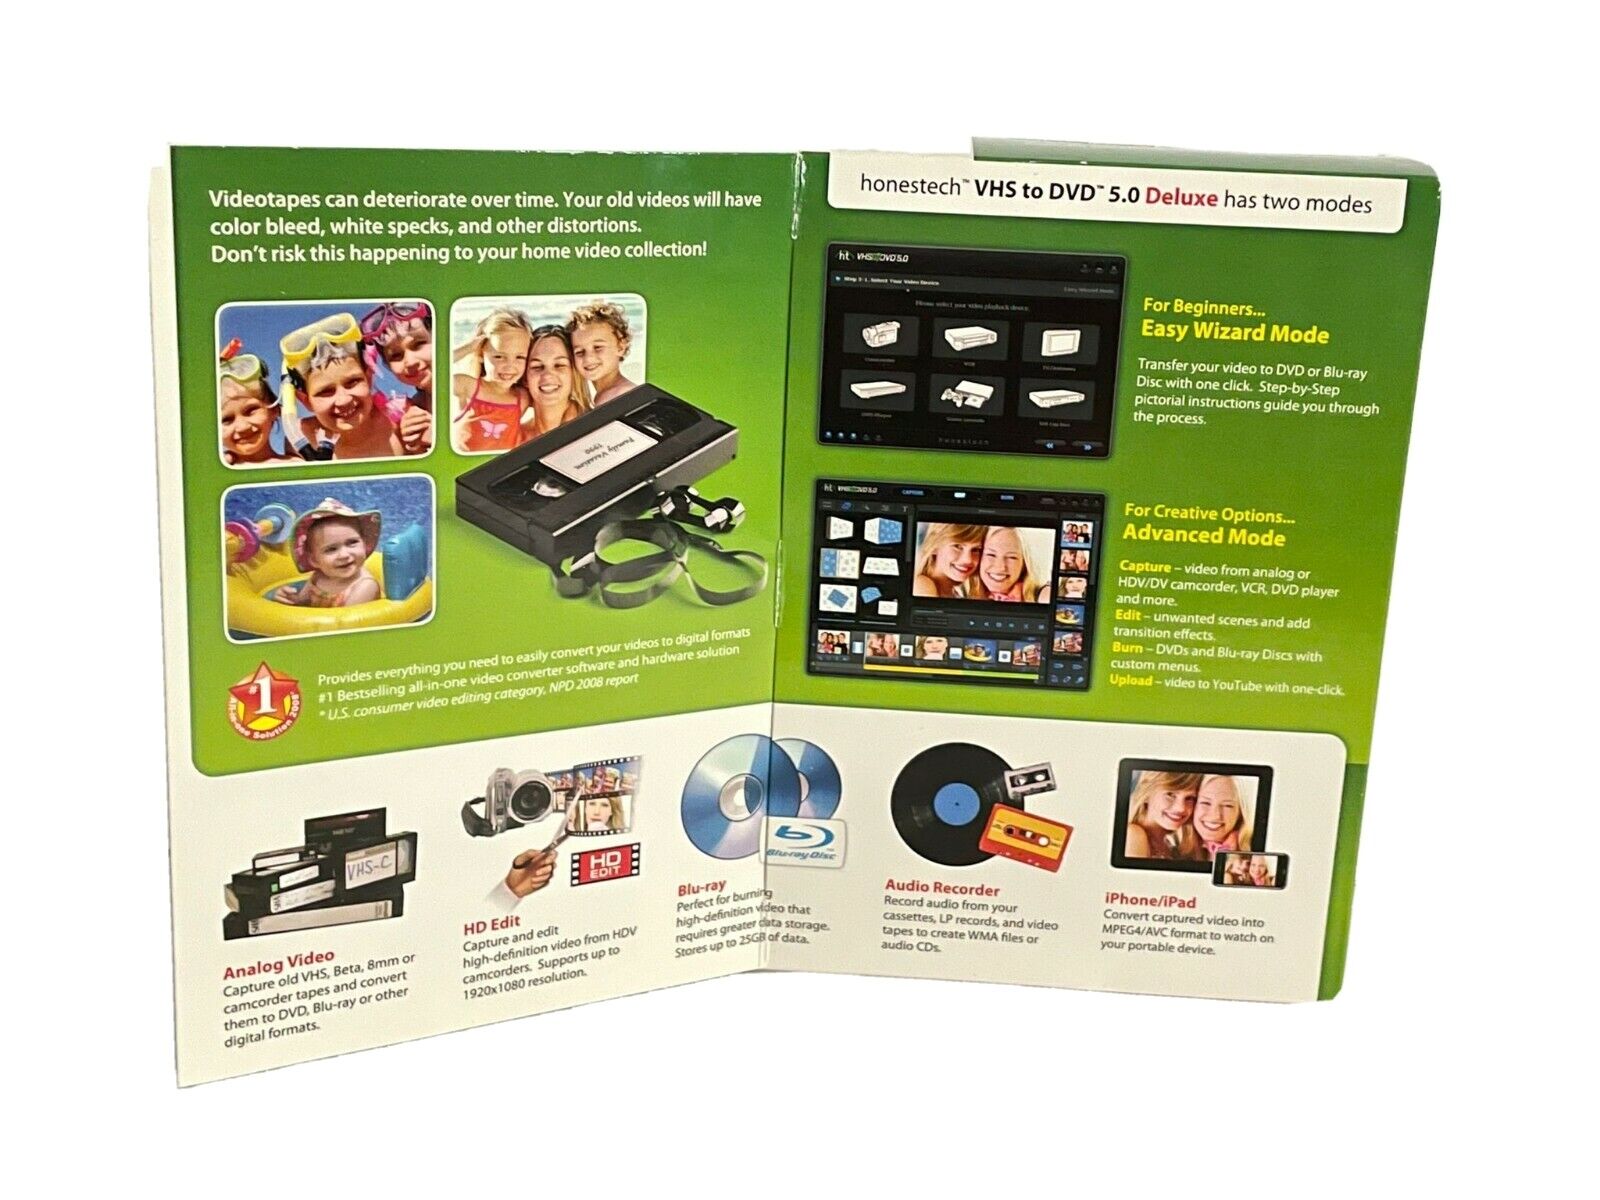 Honestech VHS to DVD 5.0 Deluxe Powerful & Effortless Video Conversion Solution